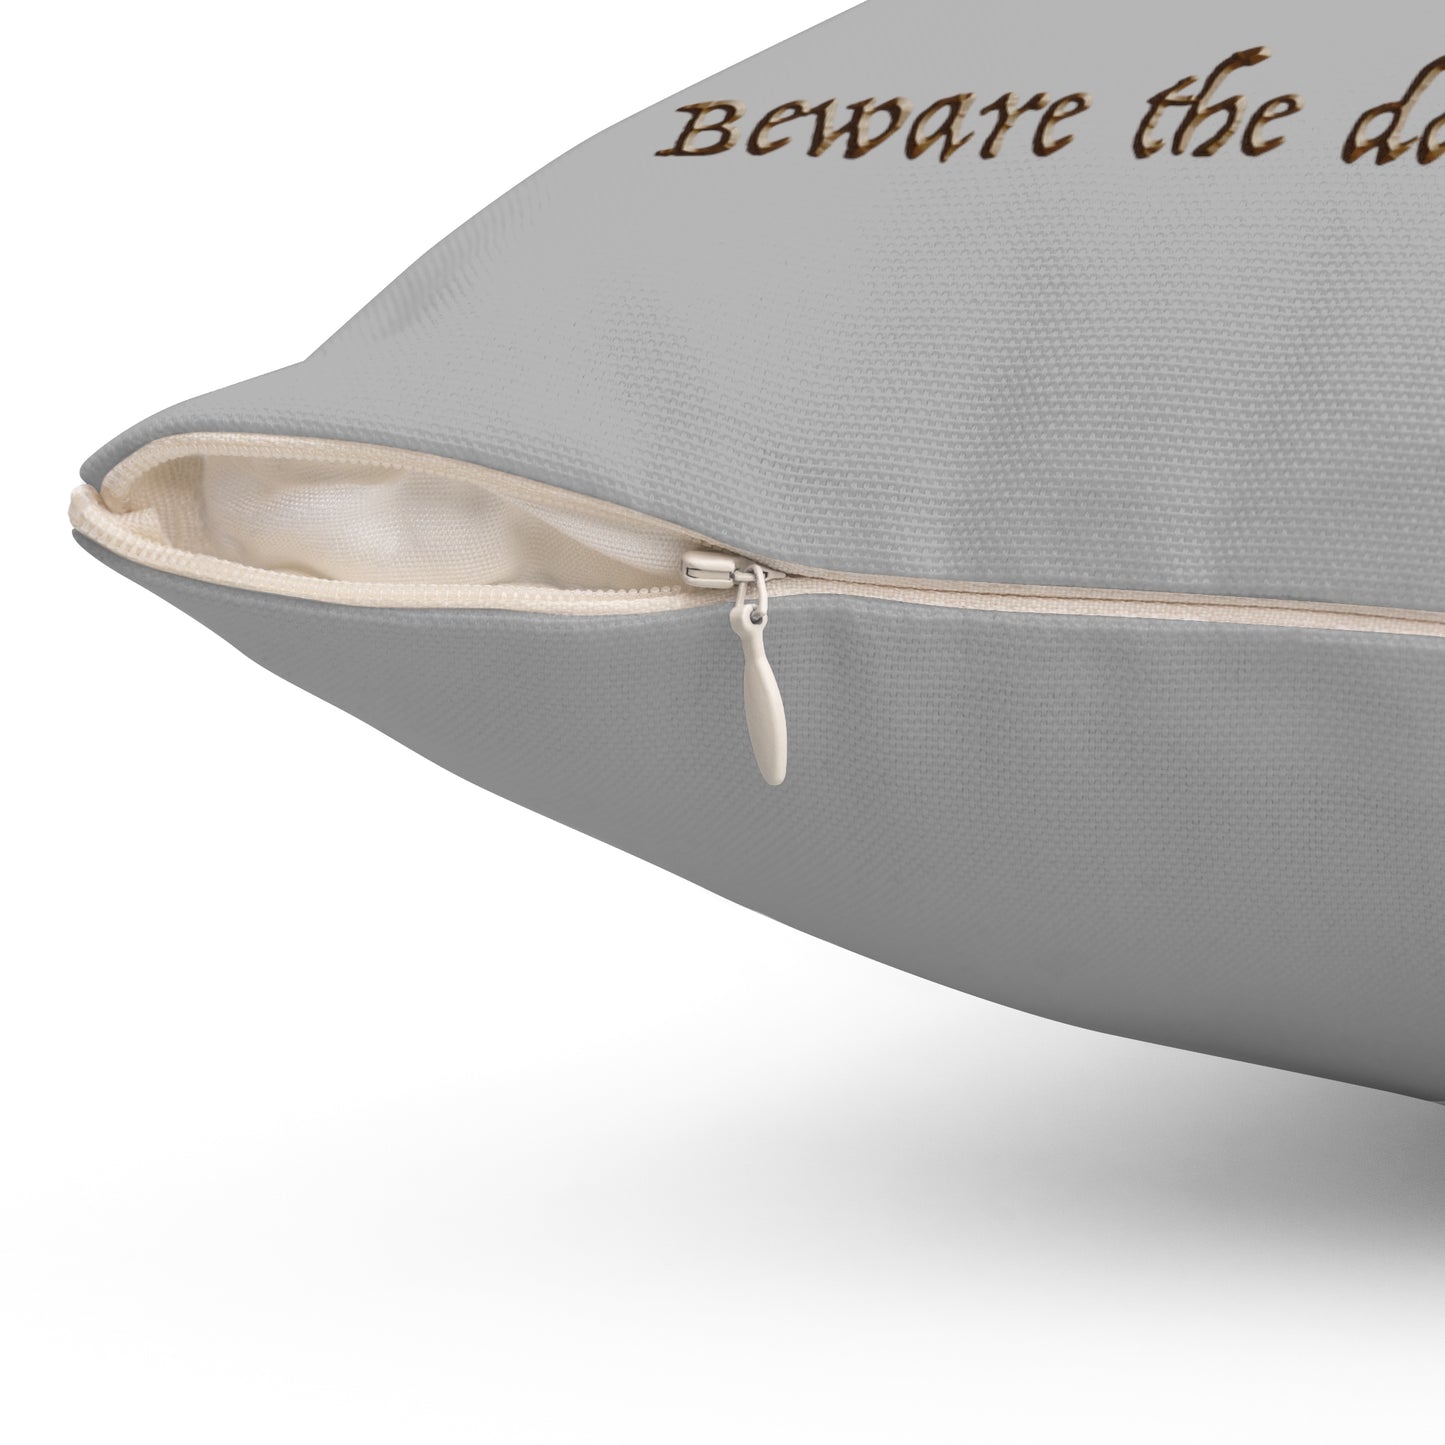 "Beware the Darkness Within" heart and keys edgy pillow zipper opening.